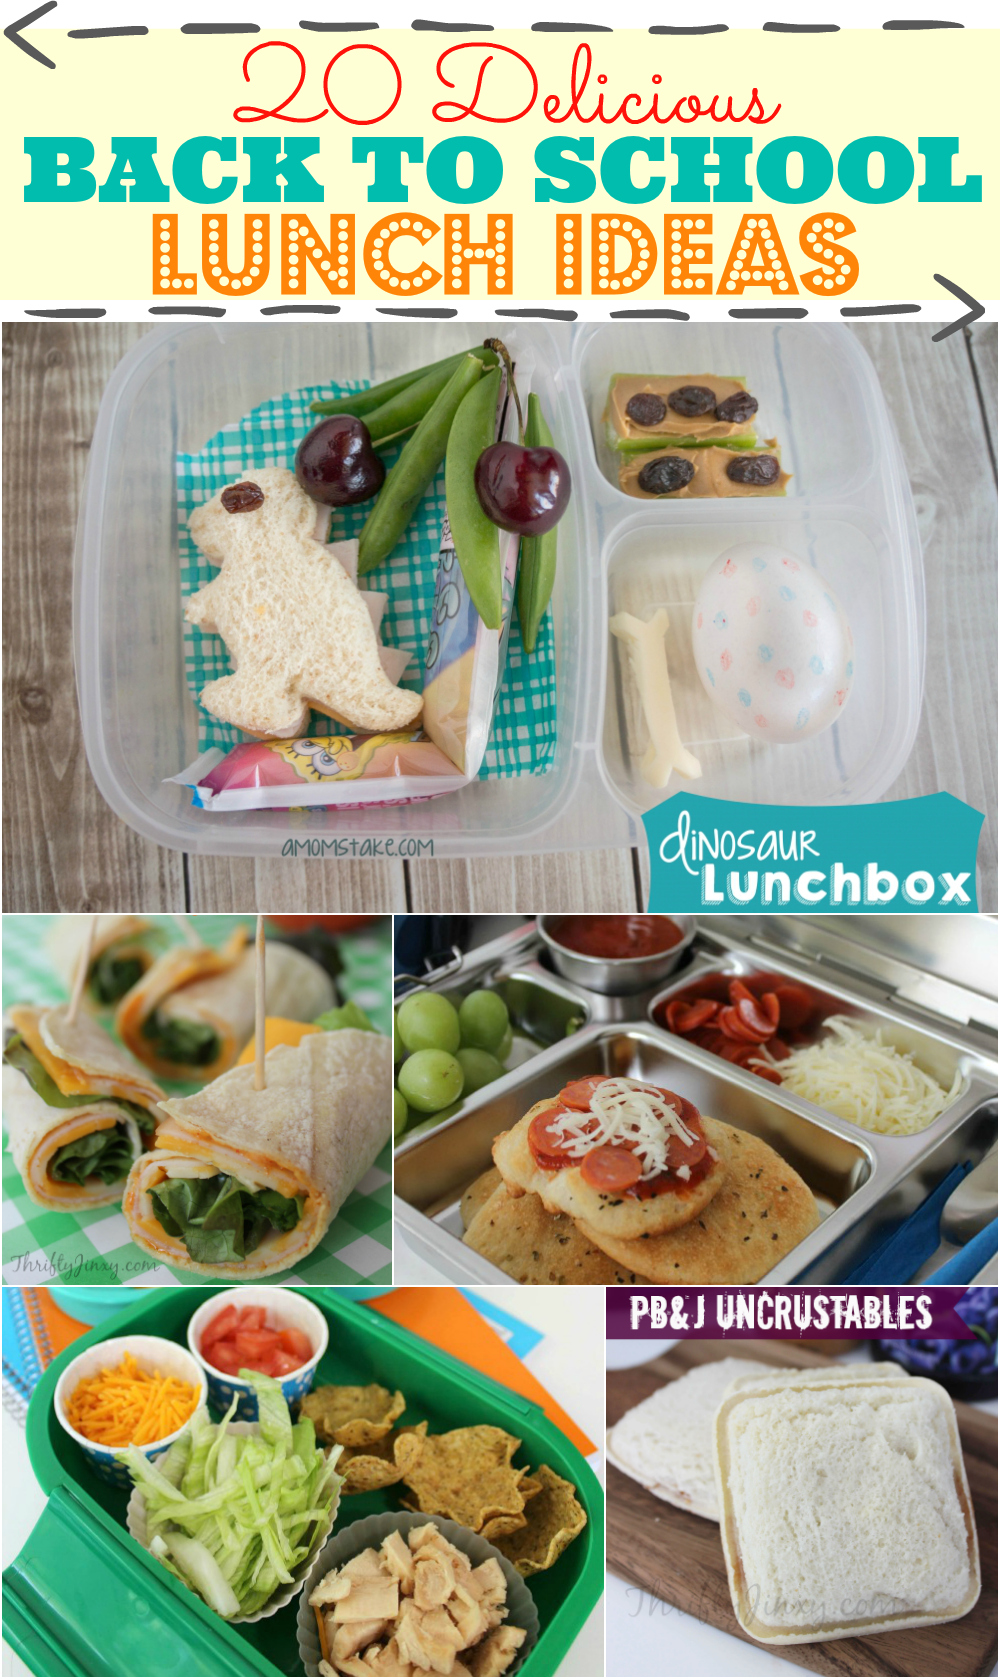 Lunch Ideas- 20 Delicious Back to School Lunch Ideas! - Grinning Cheek ...